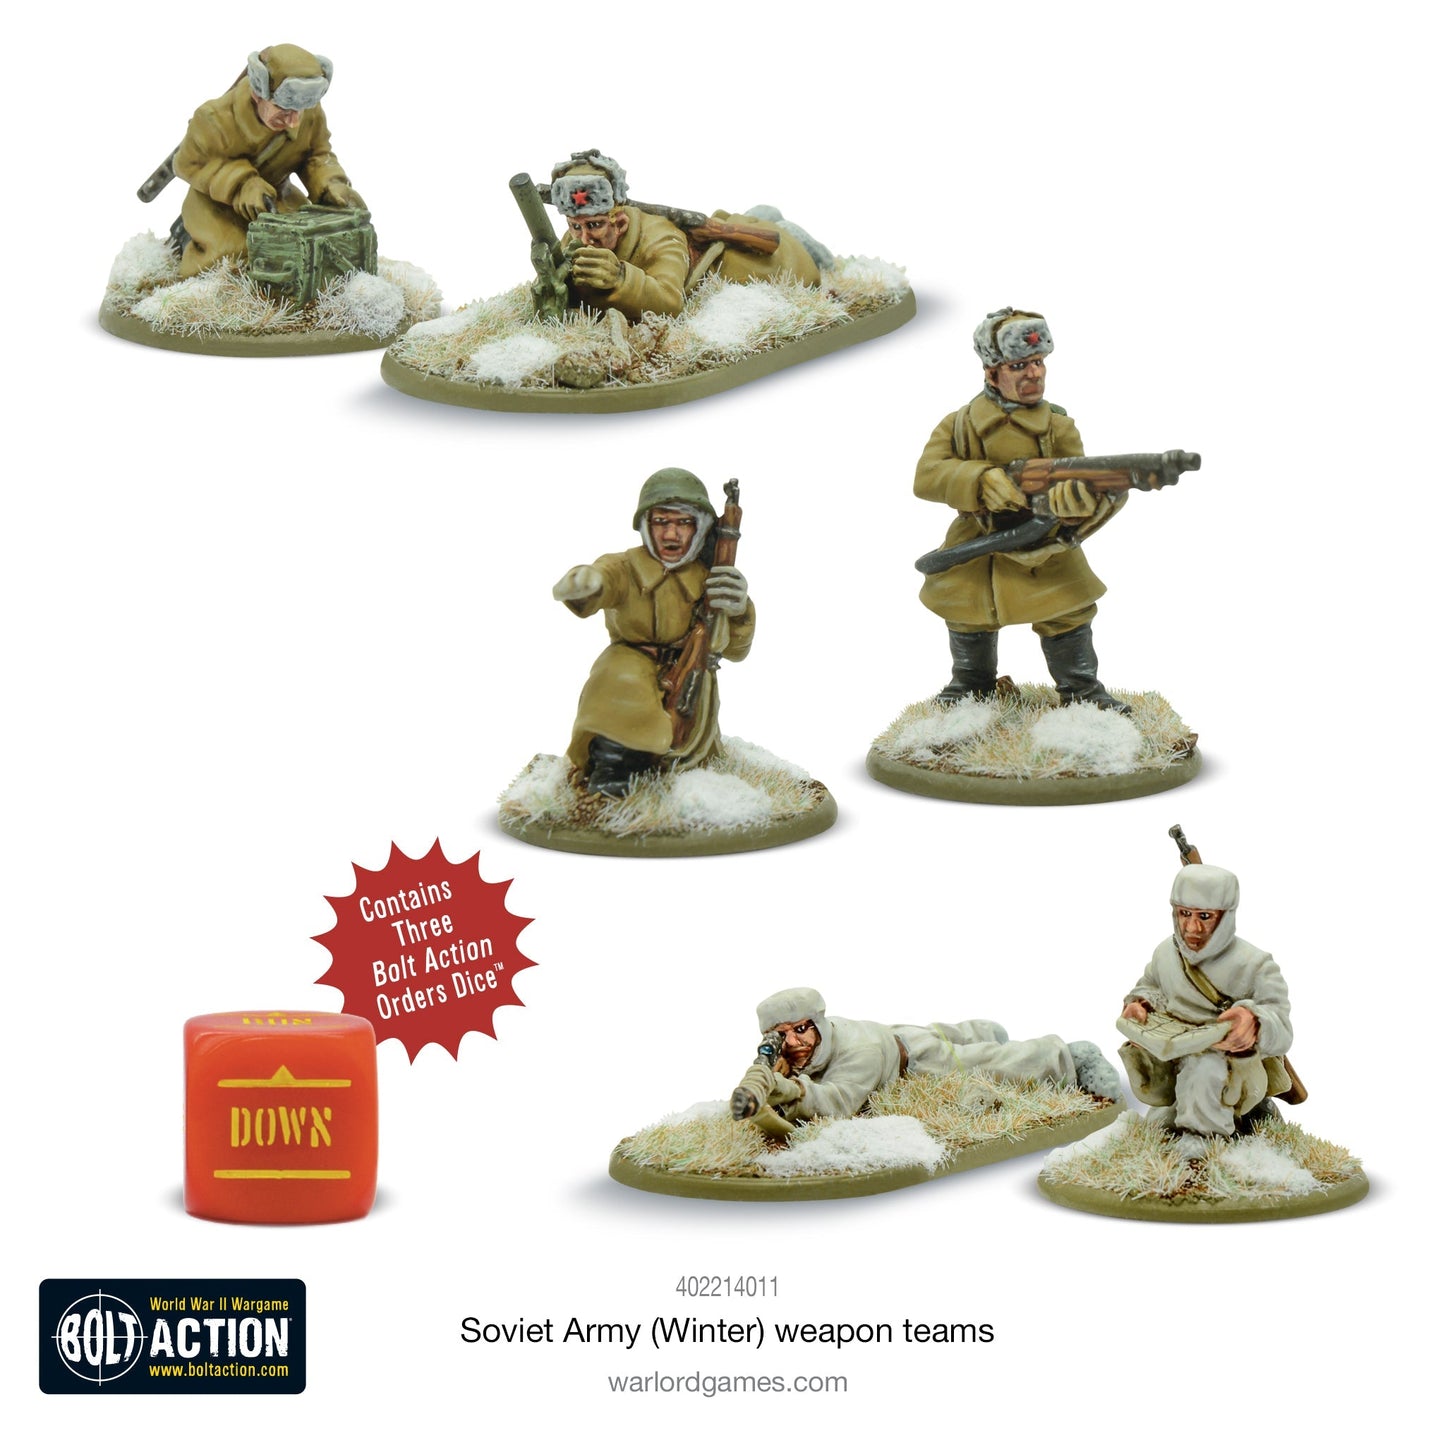 Bolt Action - Soviet Union: Soviet Army (Winter) Weapons Teams